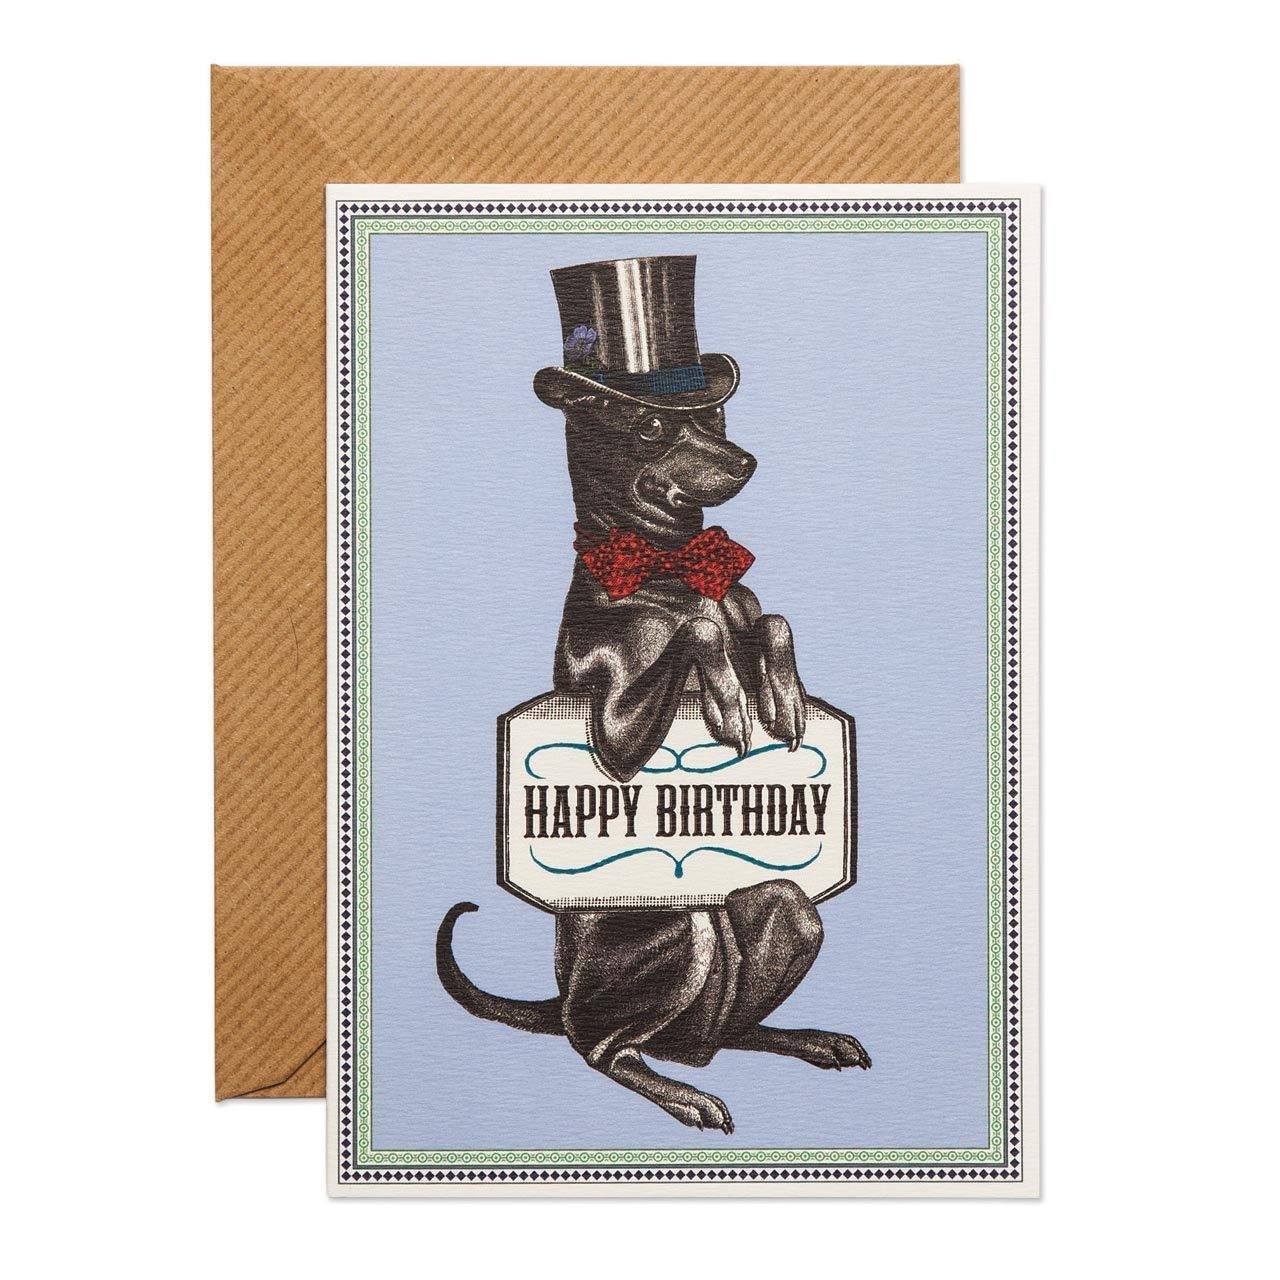 Happy Birthday Hound Greeting Card - Chase and Wonder - Proudly Made in Britain